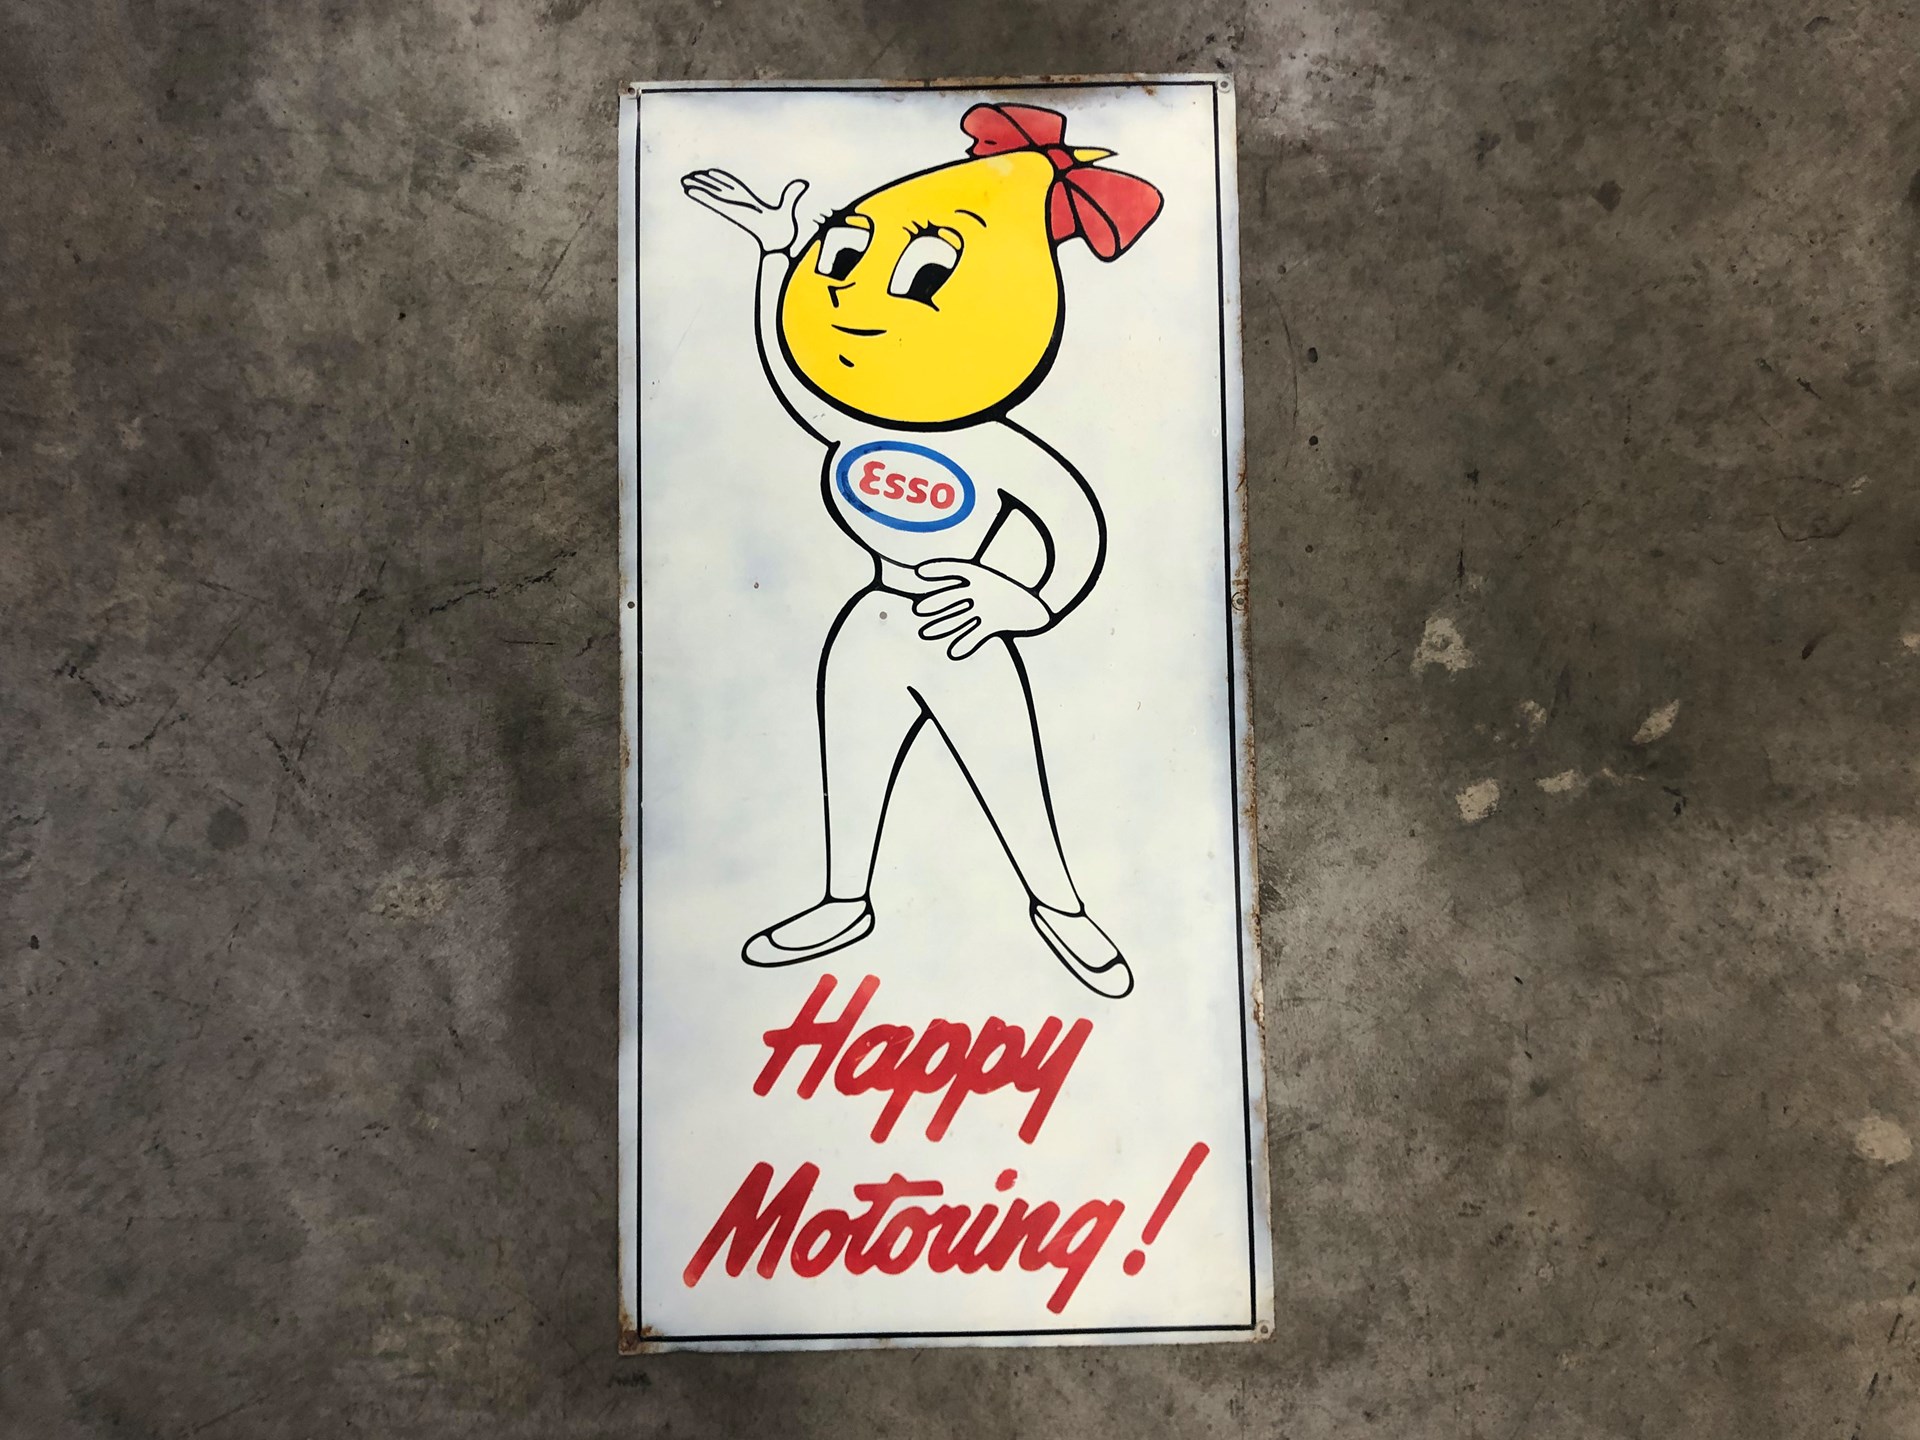 Esso Happy Motoring Tin Sign | Open Roads, April 2021 | RM Sotheby's